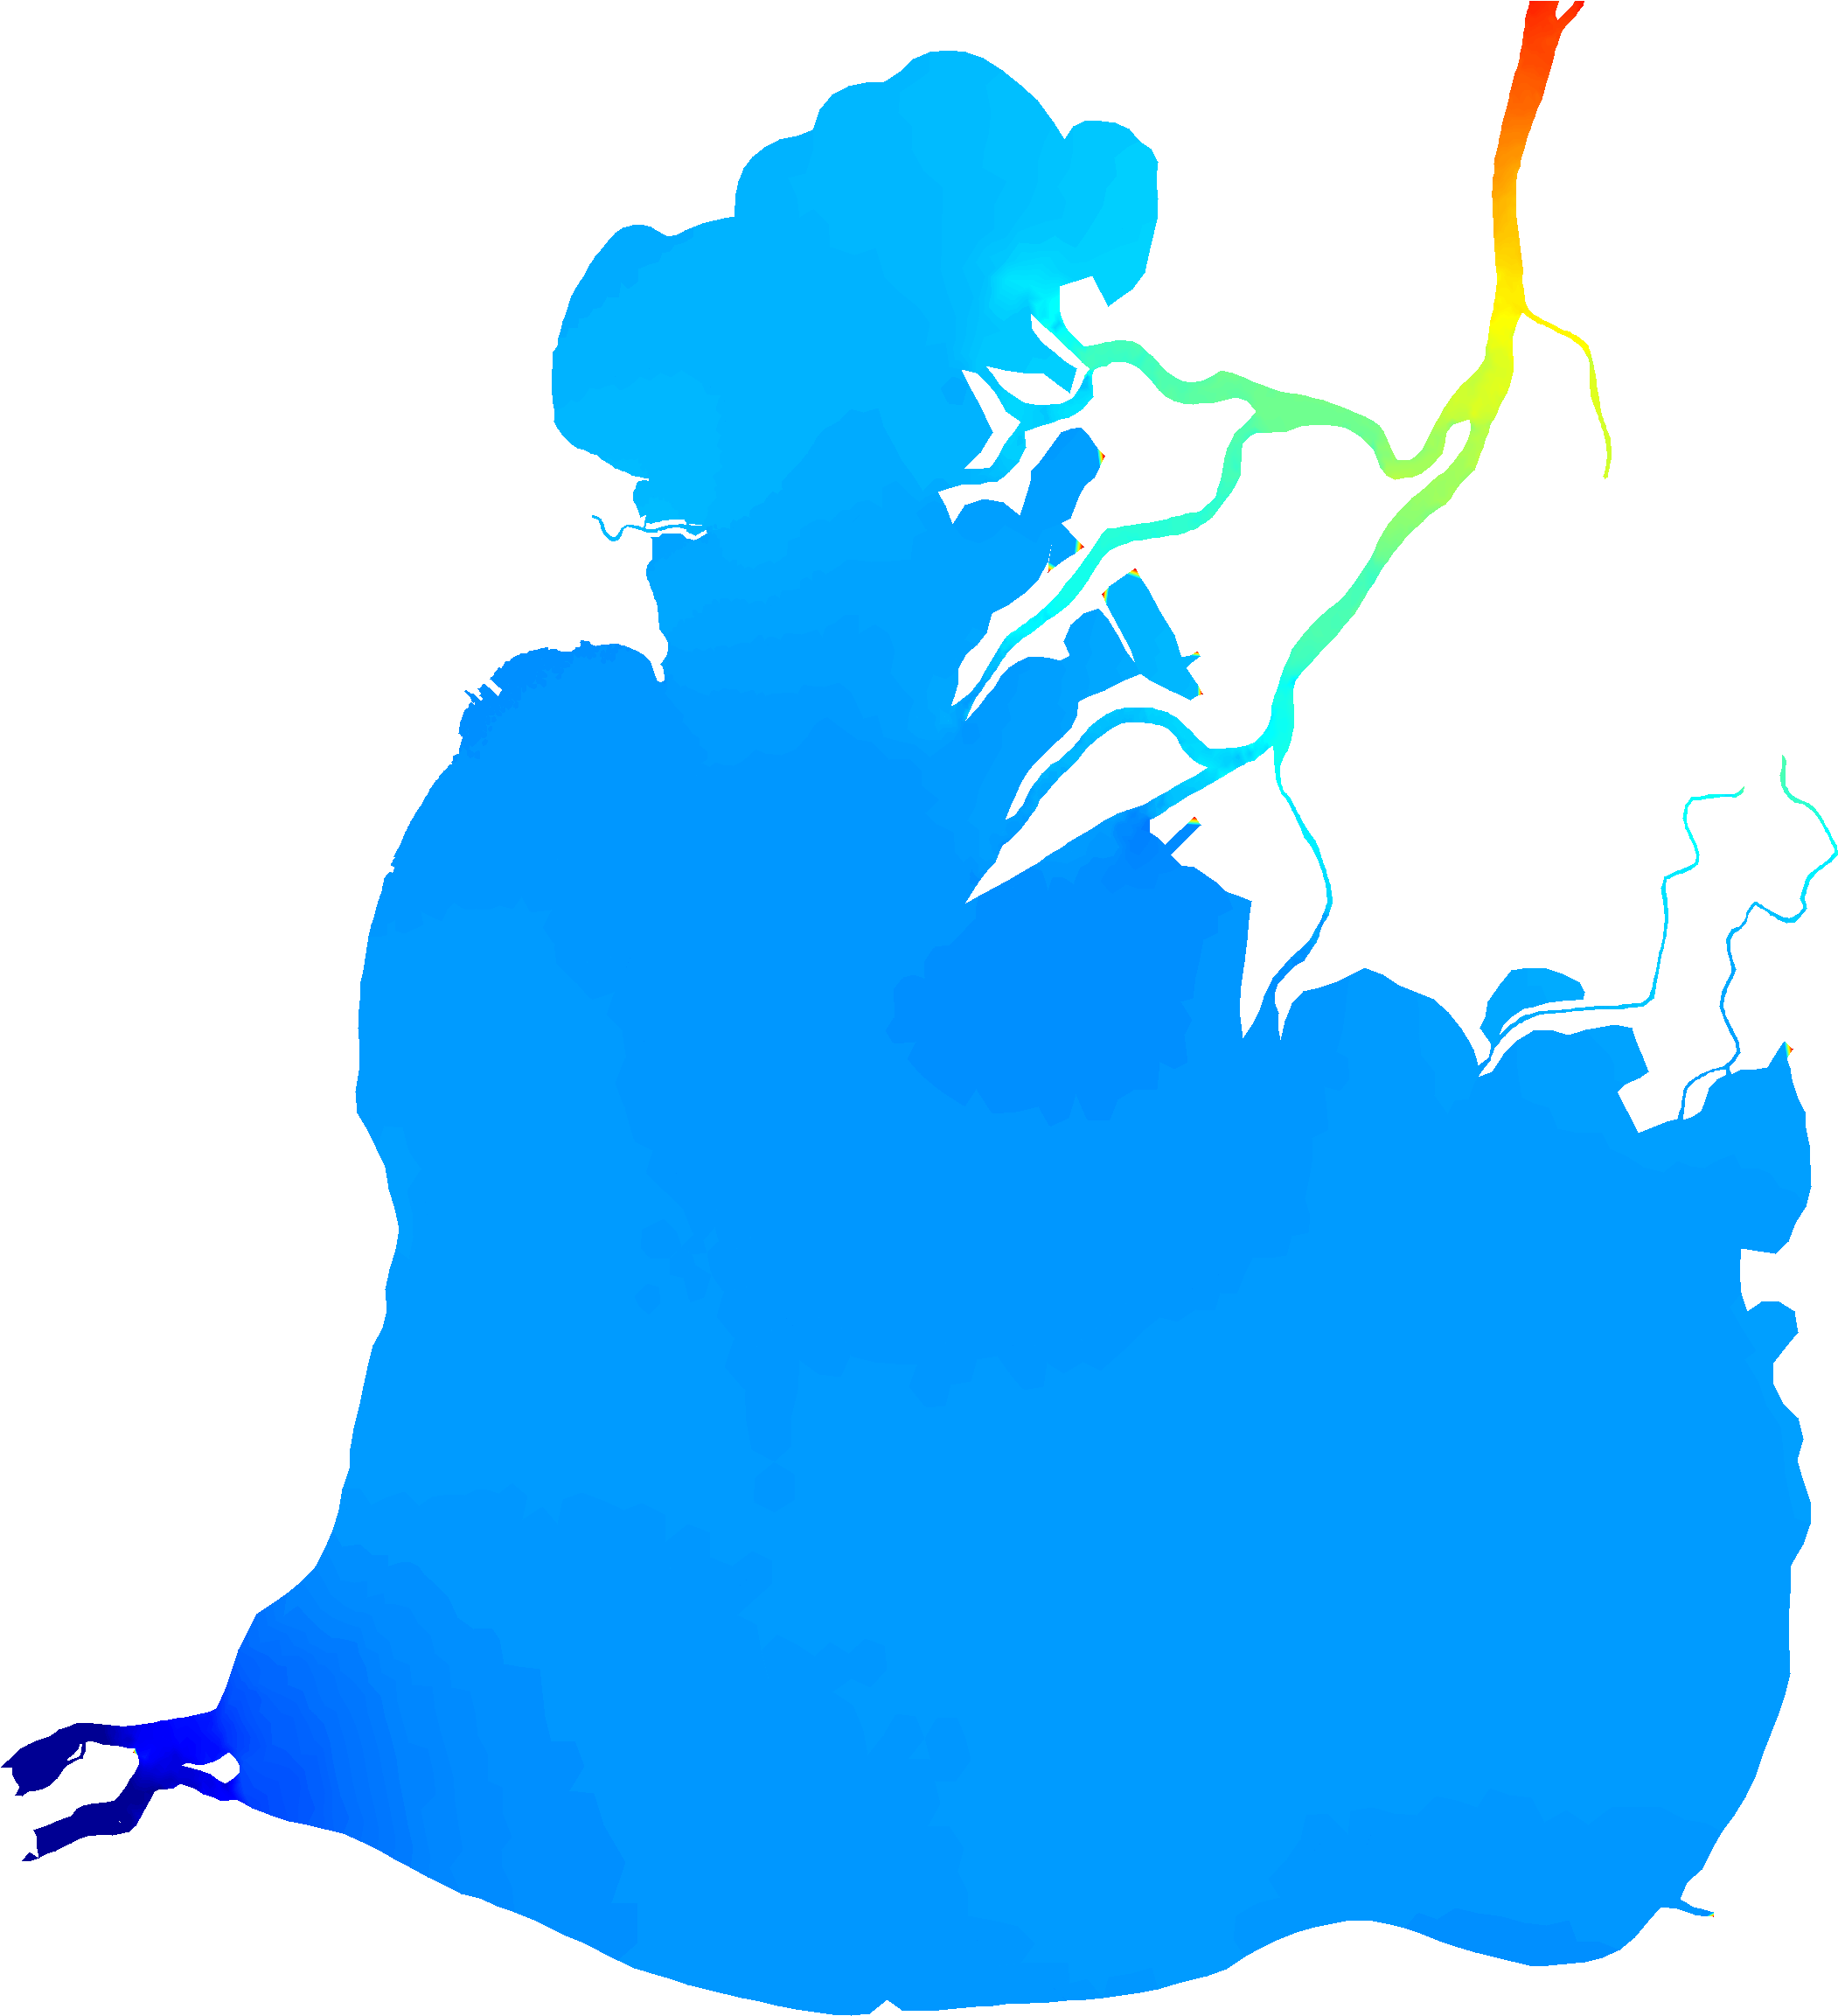 A Blue And Green Outline Of A Human Body